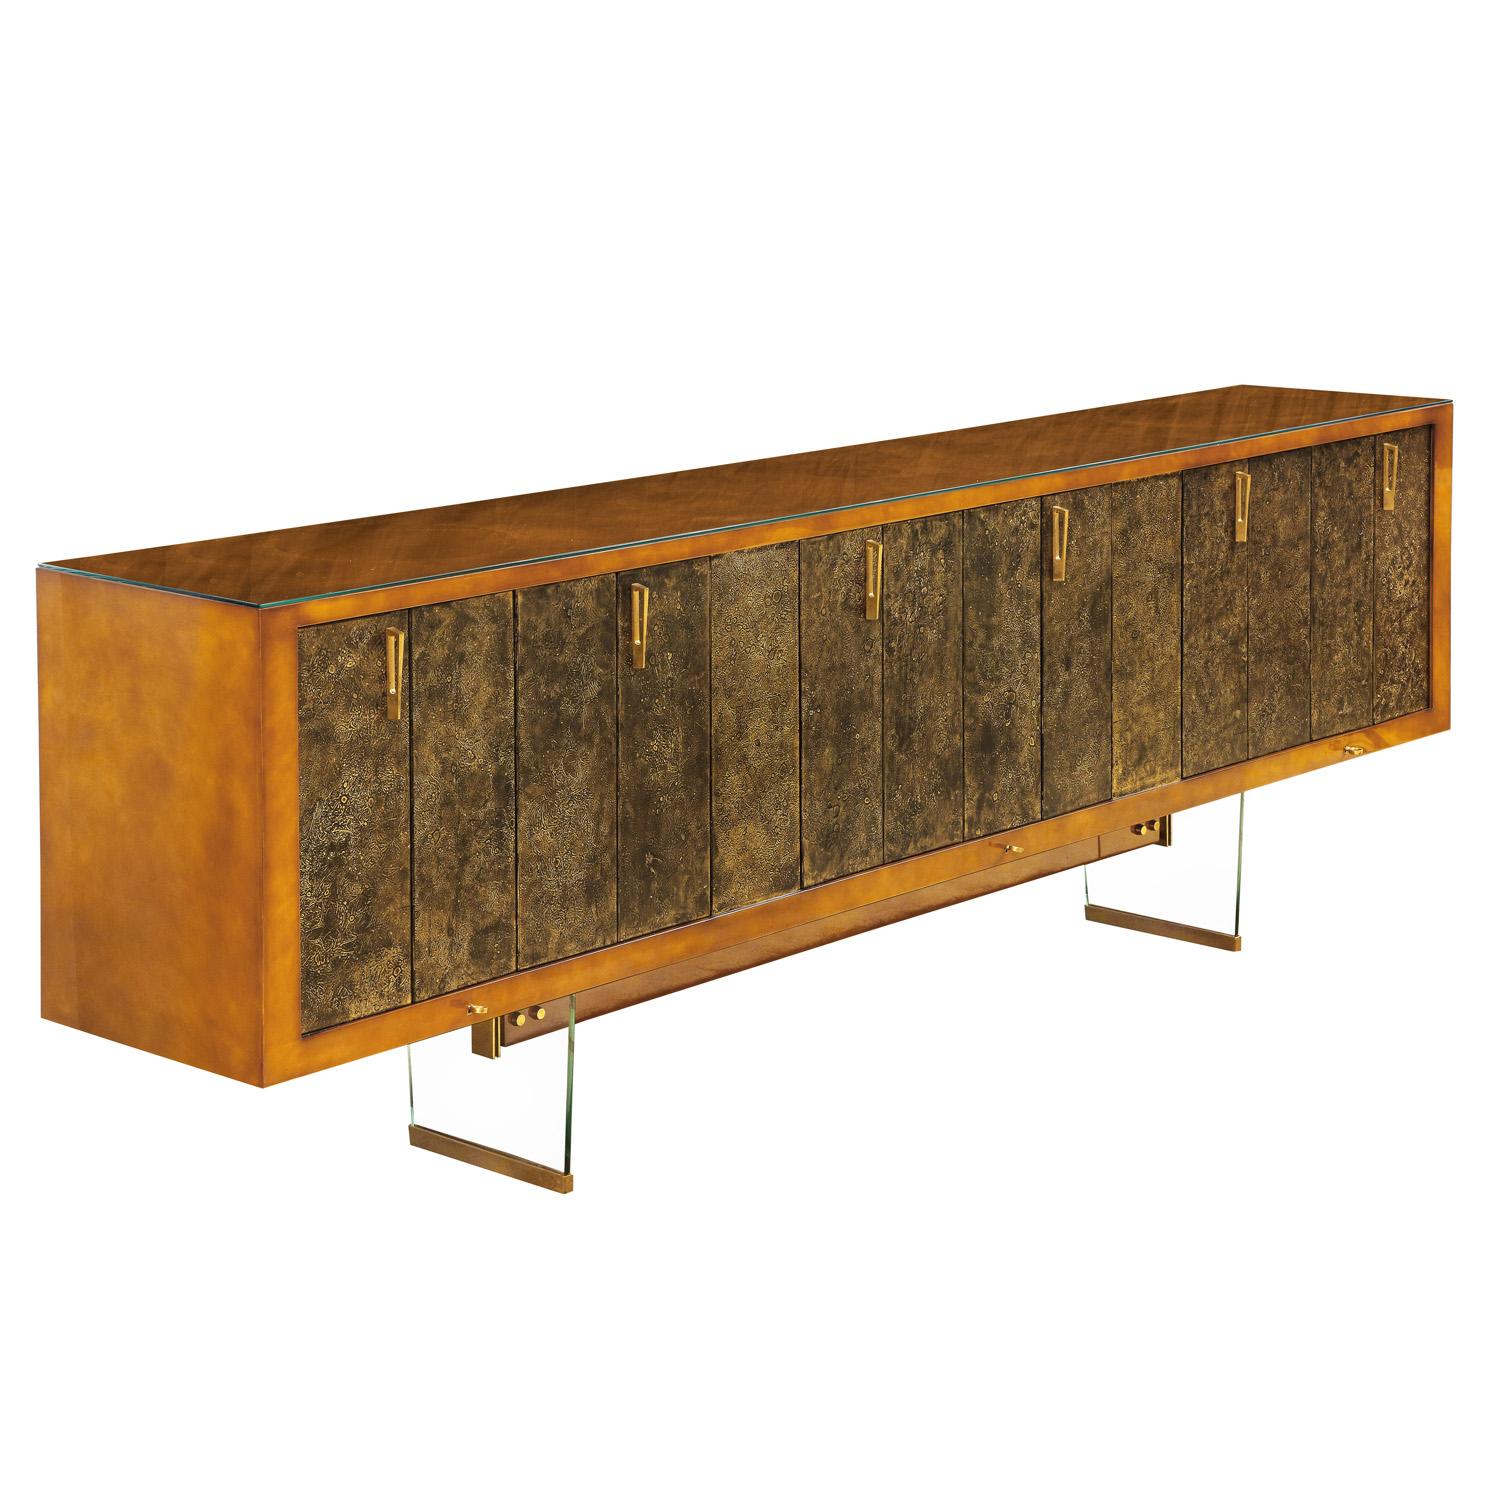 Rare and important long credenza, case with parchment color lacquer and accordion doors in unique volcanic Beka lacquer in a bronze finish with chic brass pulls on glass bases with brass sabots, by Raphael (Raphael Raffel), France 1960s. Keys at